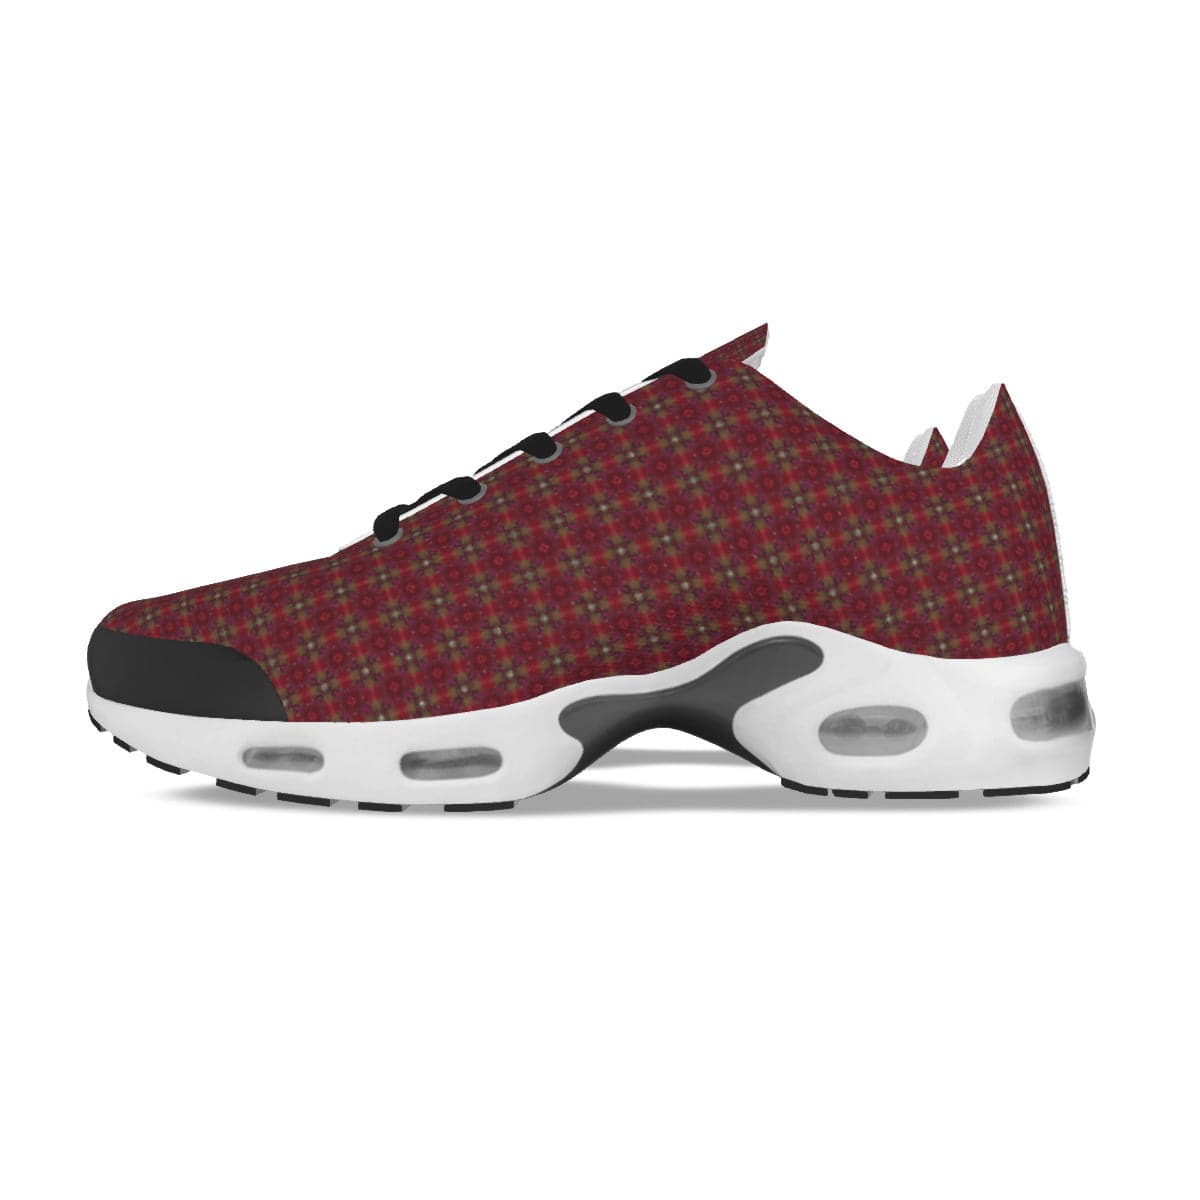 Wine Red and Olive green tartan pattern Men's Air Cushion Sports Shoes, by Sensus Studio Design